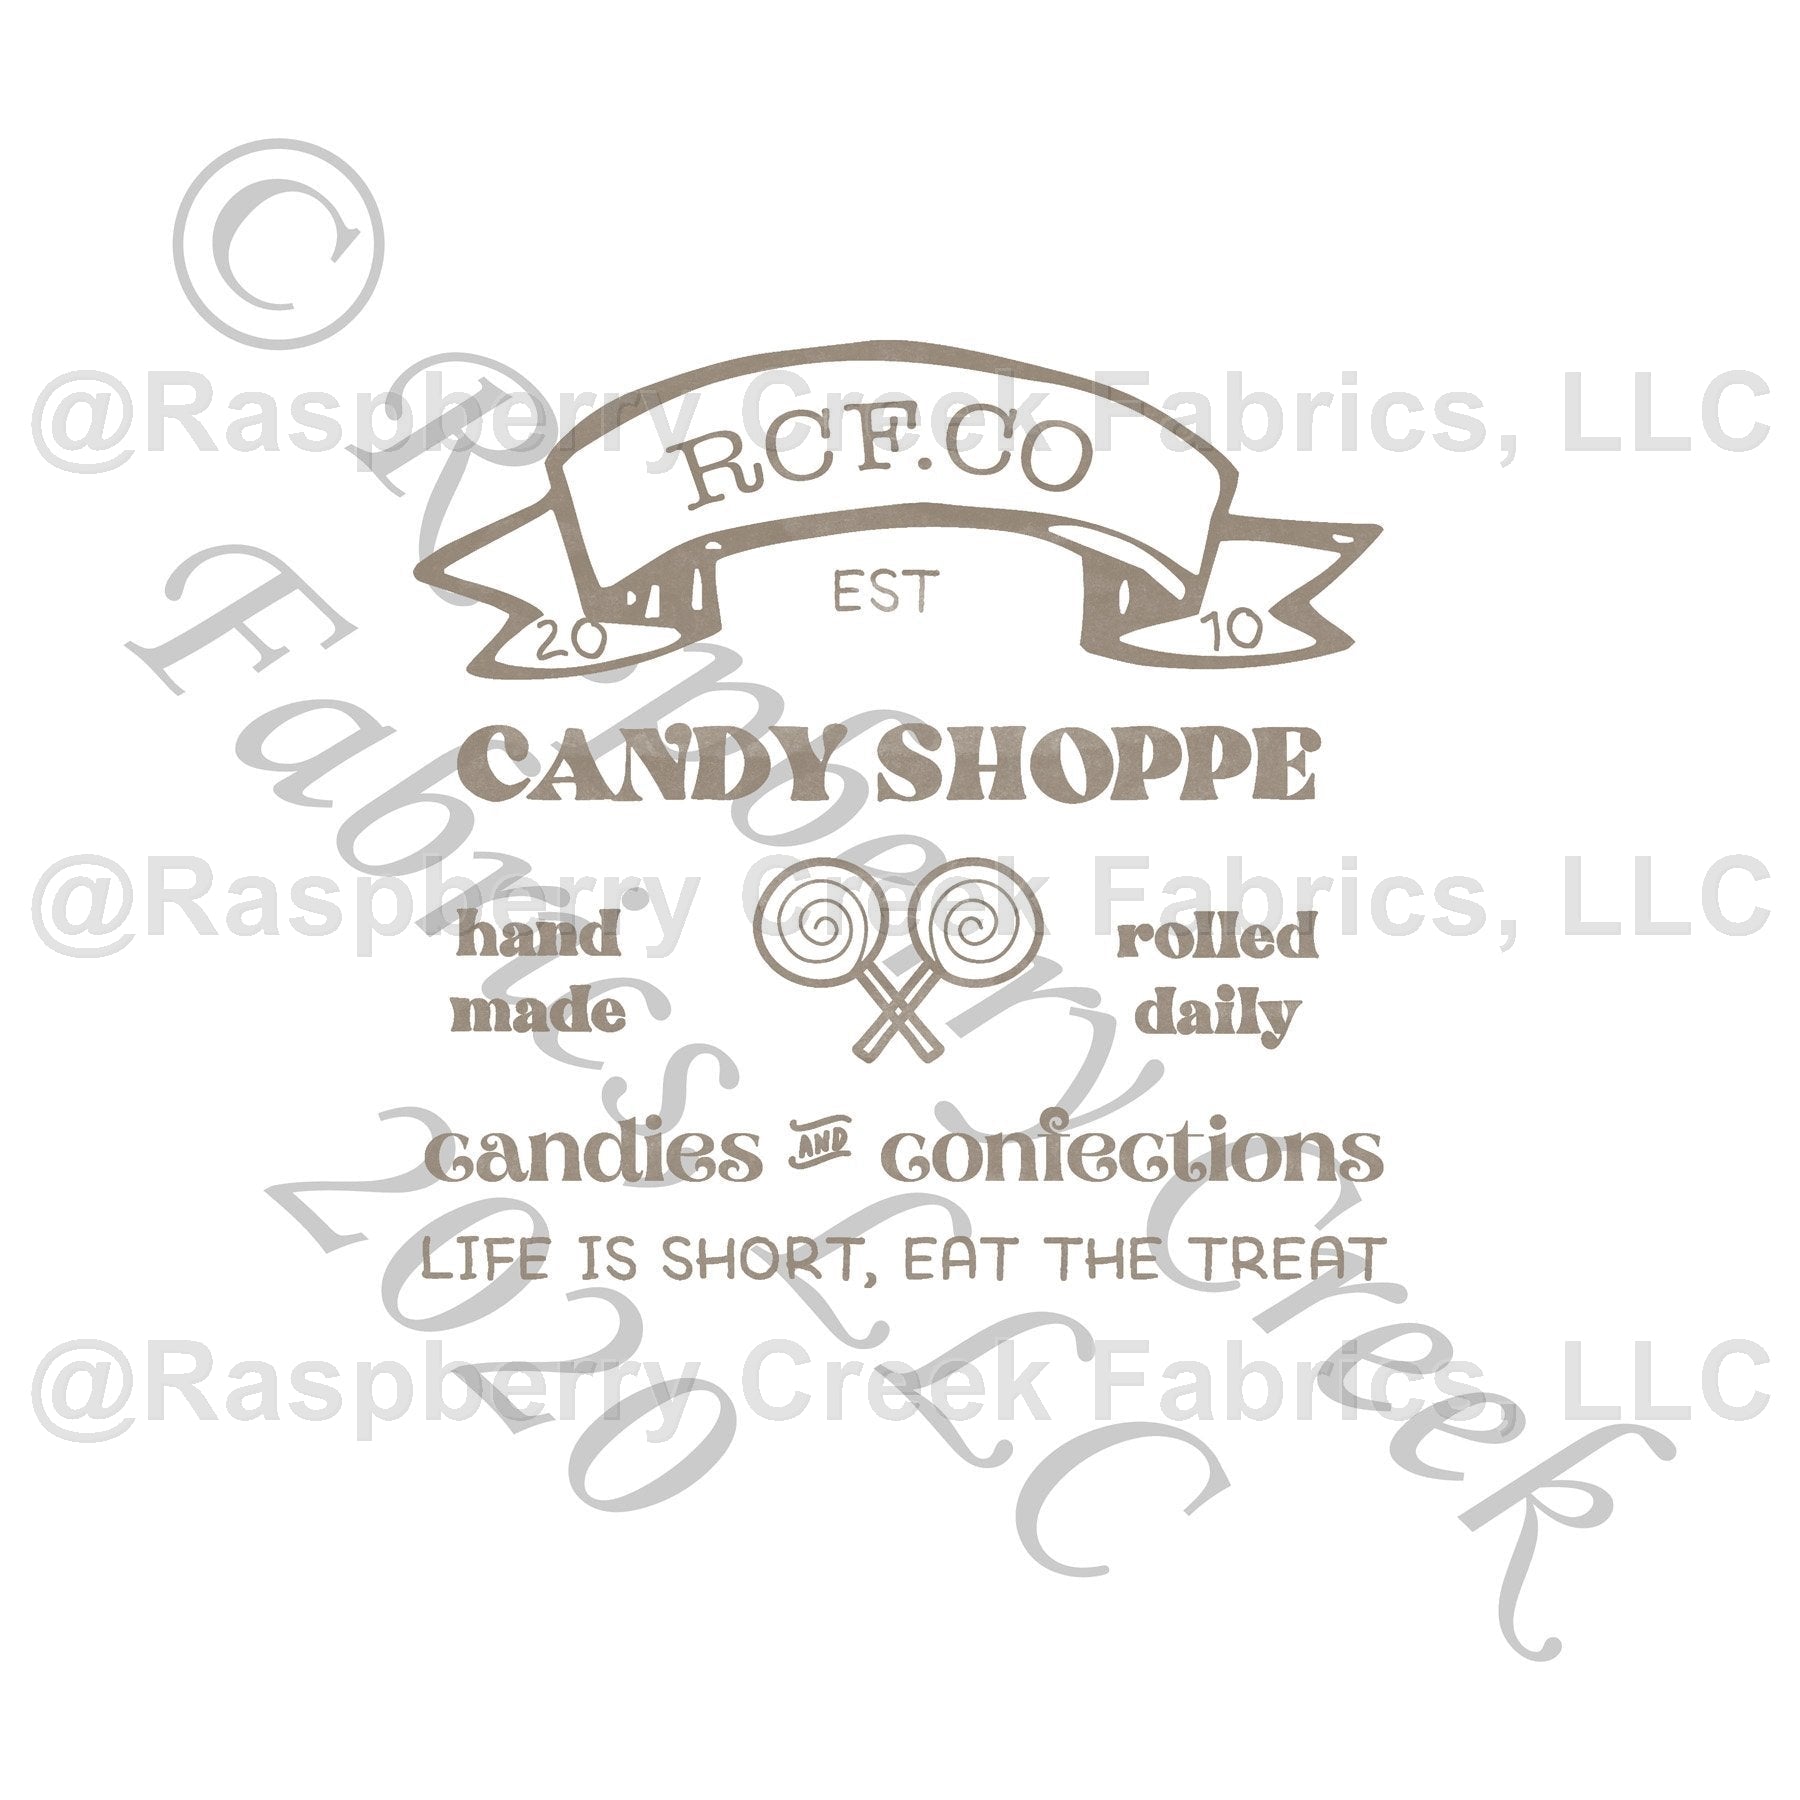 Vintage Grey RCF Candy Shoppe Panel, Candy Shoppe By Bri Powell for Club Fabrics Fabric, Raspberry Creek Fabrics, watermarked